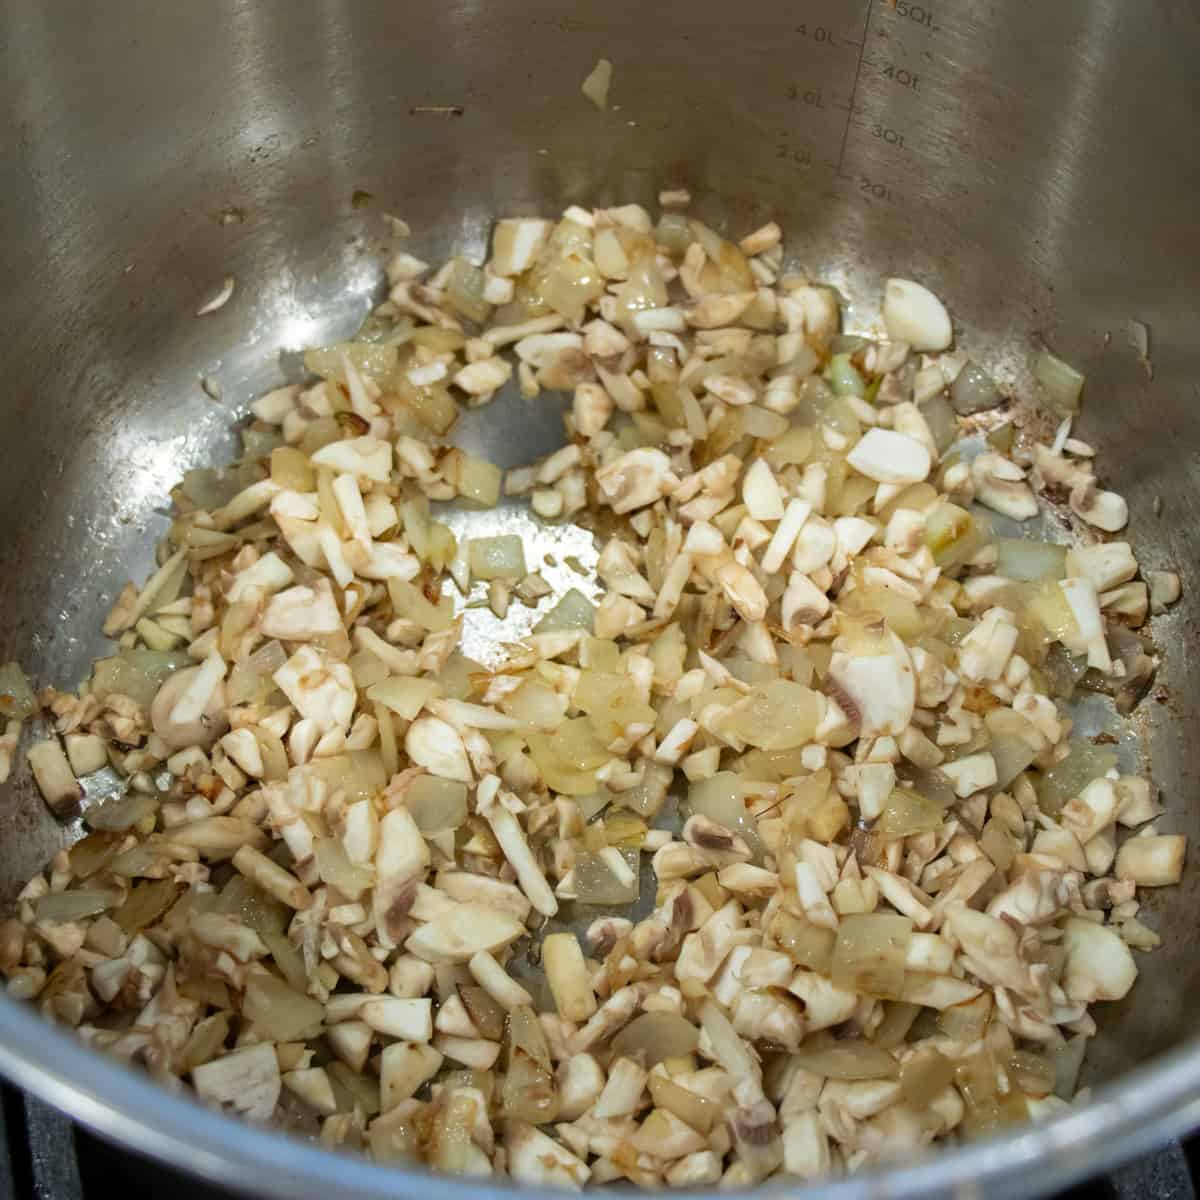 Onions, garlic and mushrooms cooking in a saucepan.